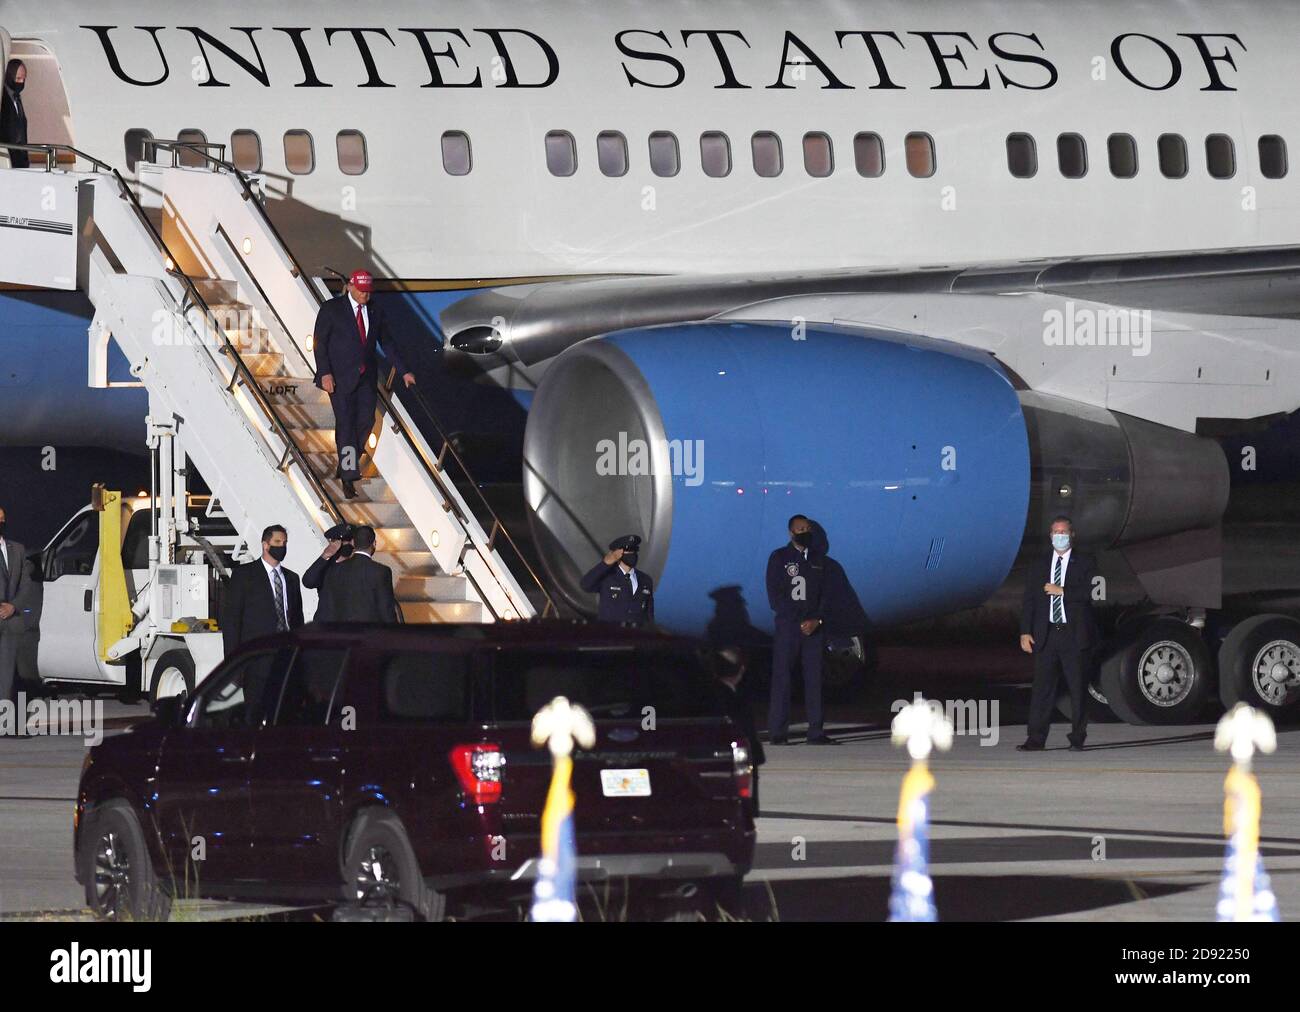 Opa Locka, United States. 01st Nov, 2020. November 1, 2020 - Opa-Locka, Florida, United States - U.S. President Donald Trump deplanes Air Force One as he arrives to speak at a campaign rally at Miami-Opa Locka Executive Airport on November 1, 2020 in Opa-Locka, Florida. President Trump held events in five states today, as he continues his campaign against Democratic presidential nominee Joe Biden two days before the November 3 election. Credit: Paul Hennessy/Alamy Live News Stock Photo